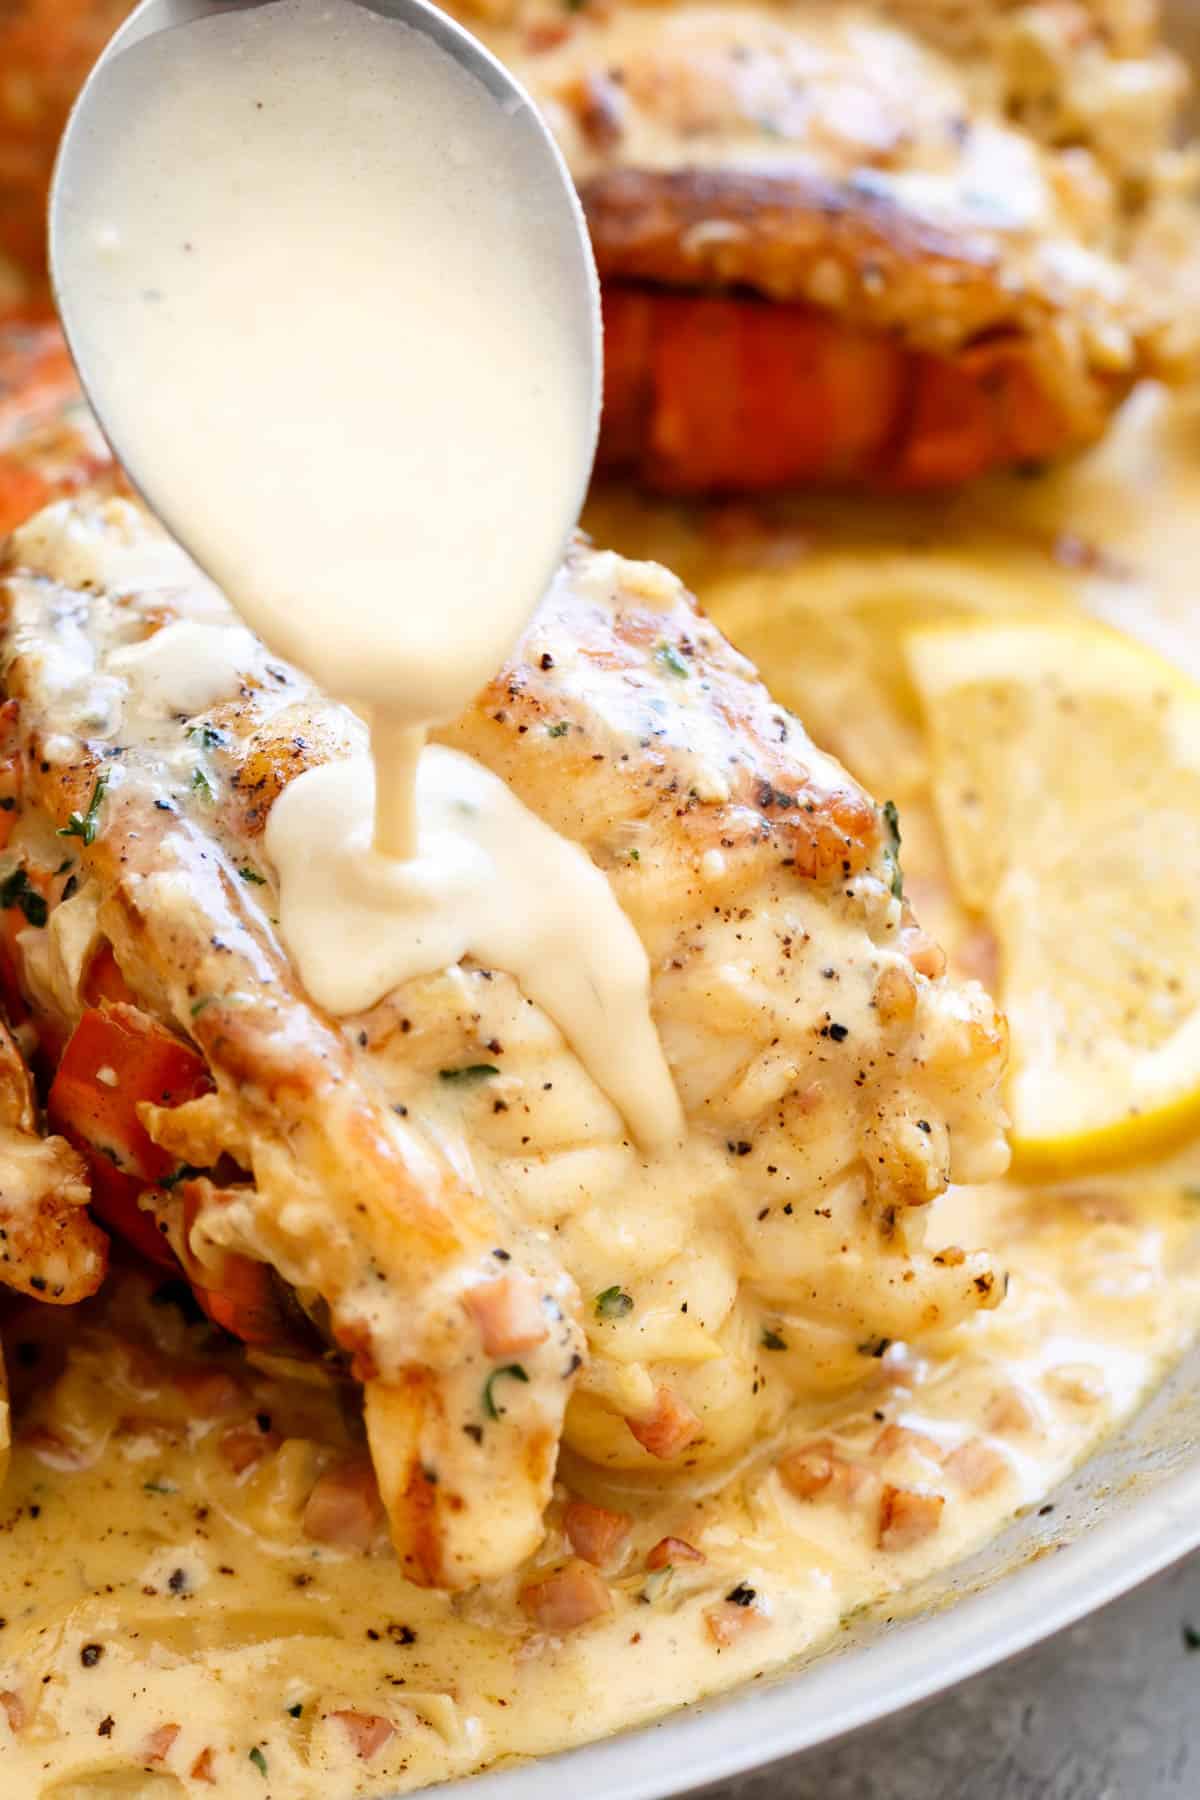 Lobster tails served with a creamy garlic sauce | cafedelites.com